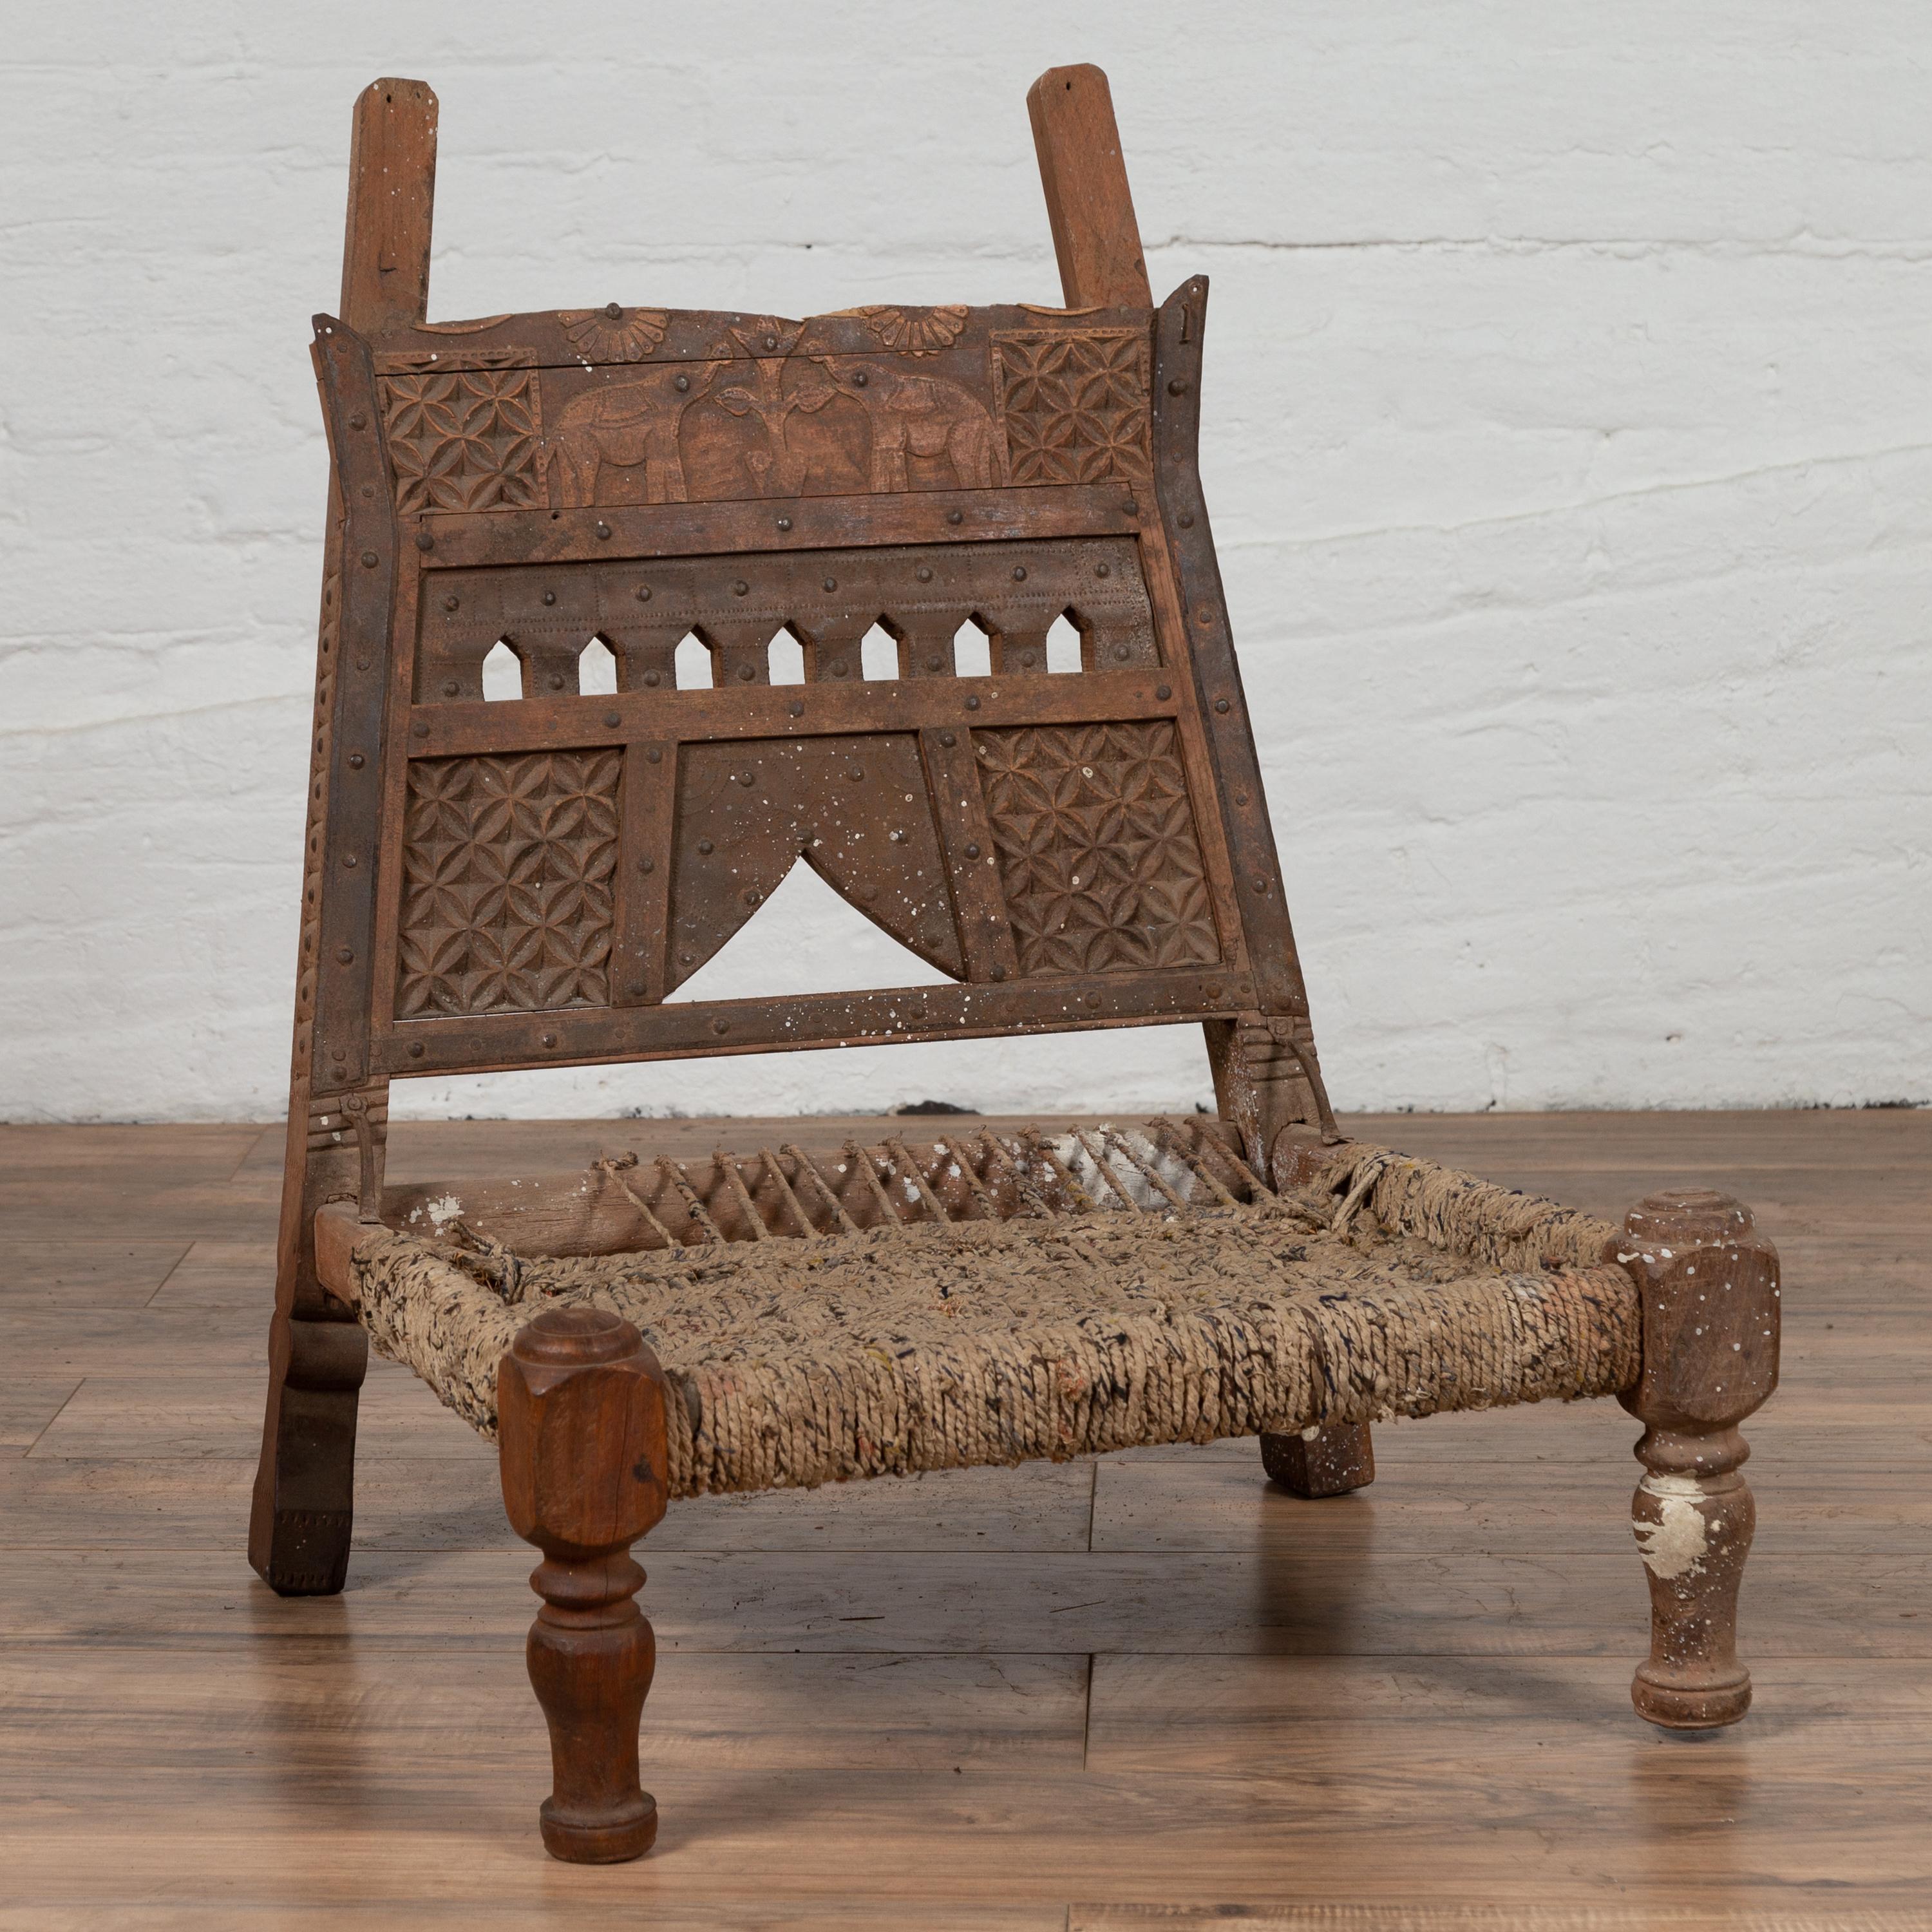 Rustic Indian Low Wooden Chair with Rope Seat and Weathered Appearance In Distressed Condition For Sale In Yonkers, NY